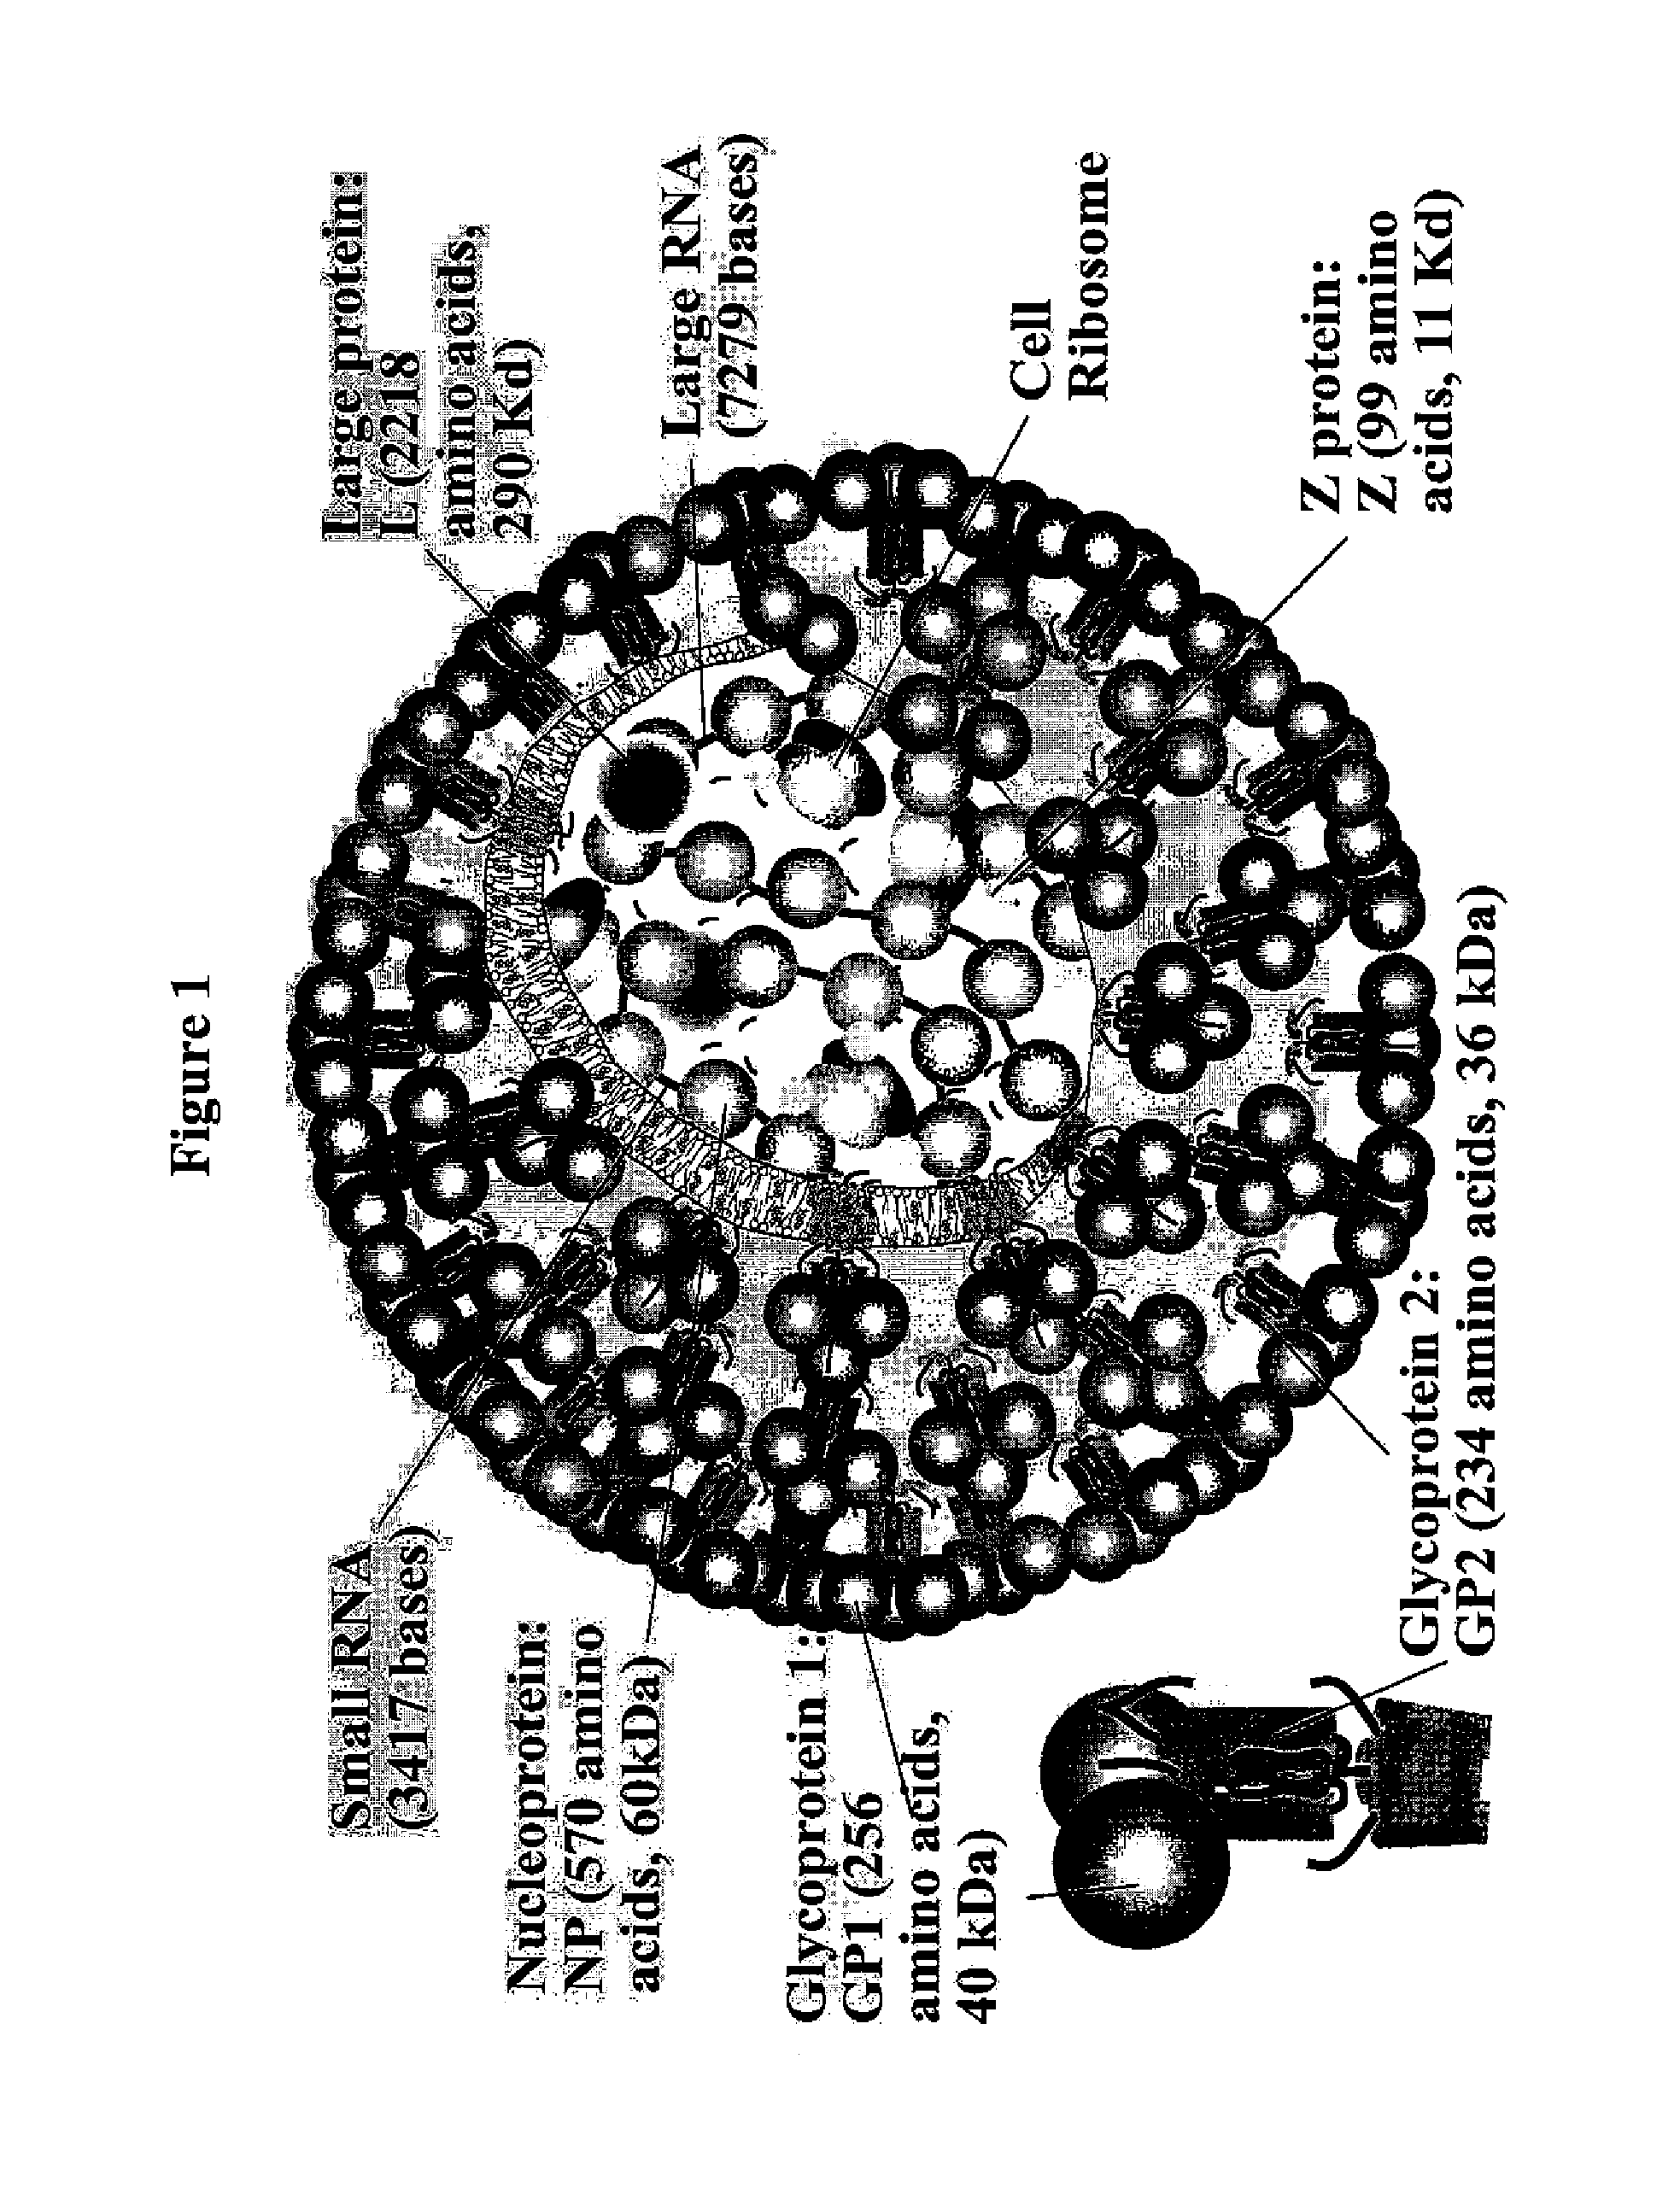 Lassa virus-like particles and methods of production thereof